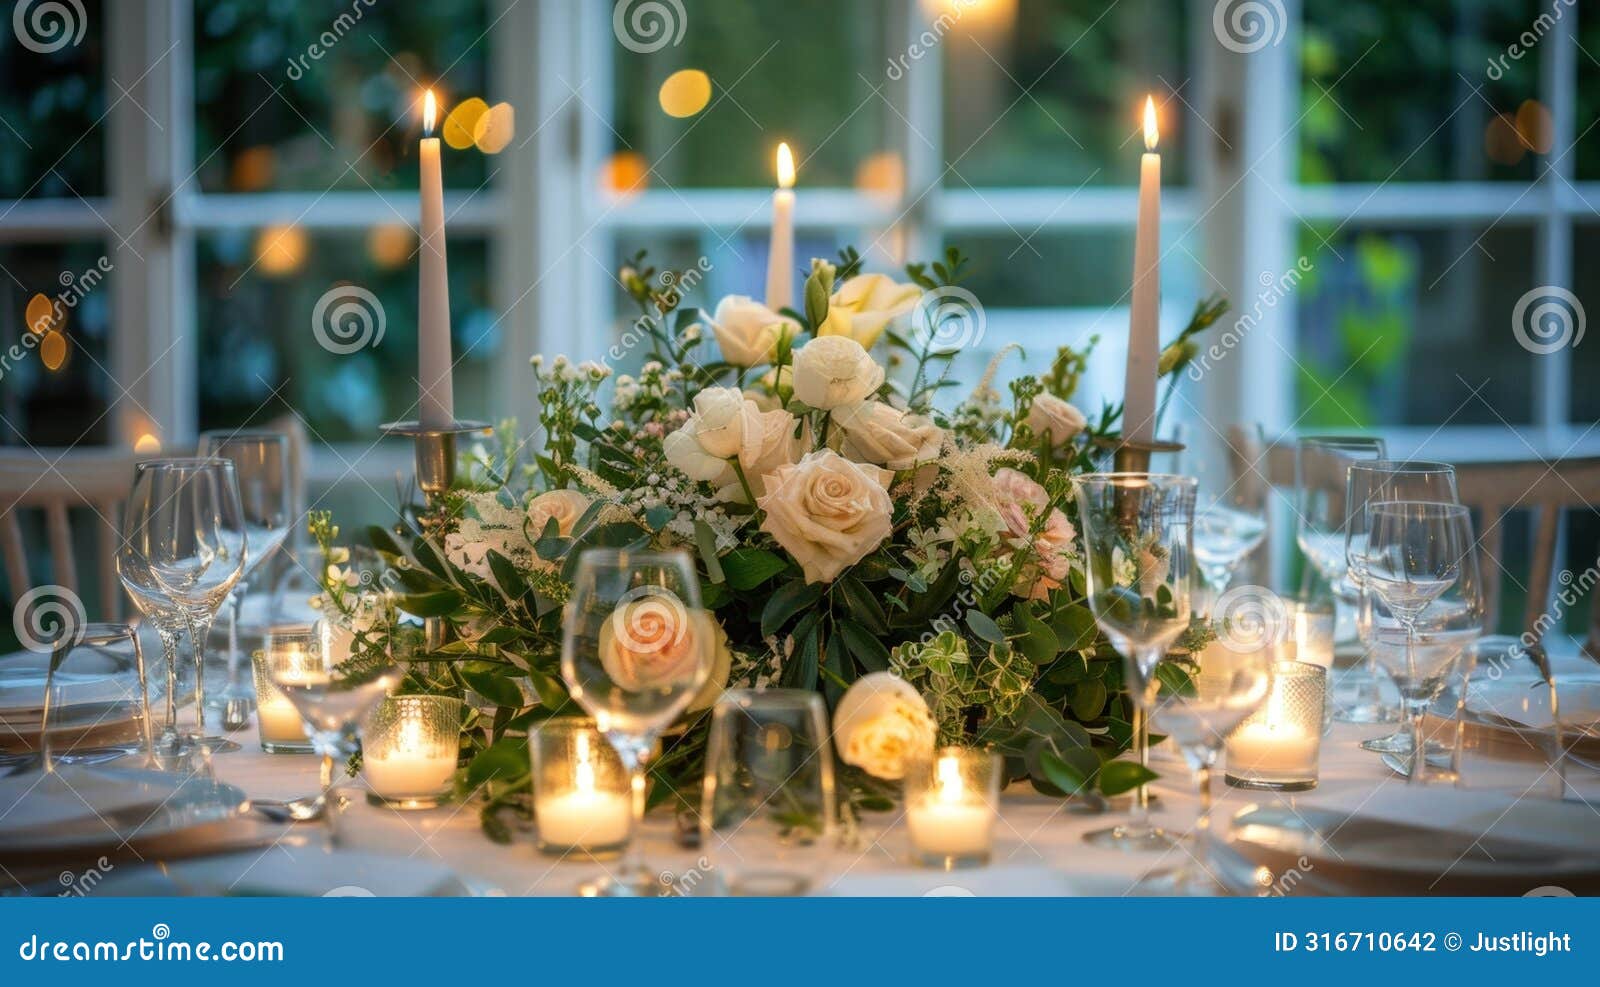 the candlelit centrepiece of fresh flowers and greenery perfectly complements the ethereal lighting creating a beautiful